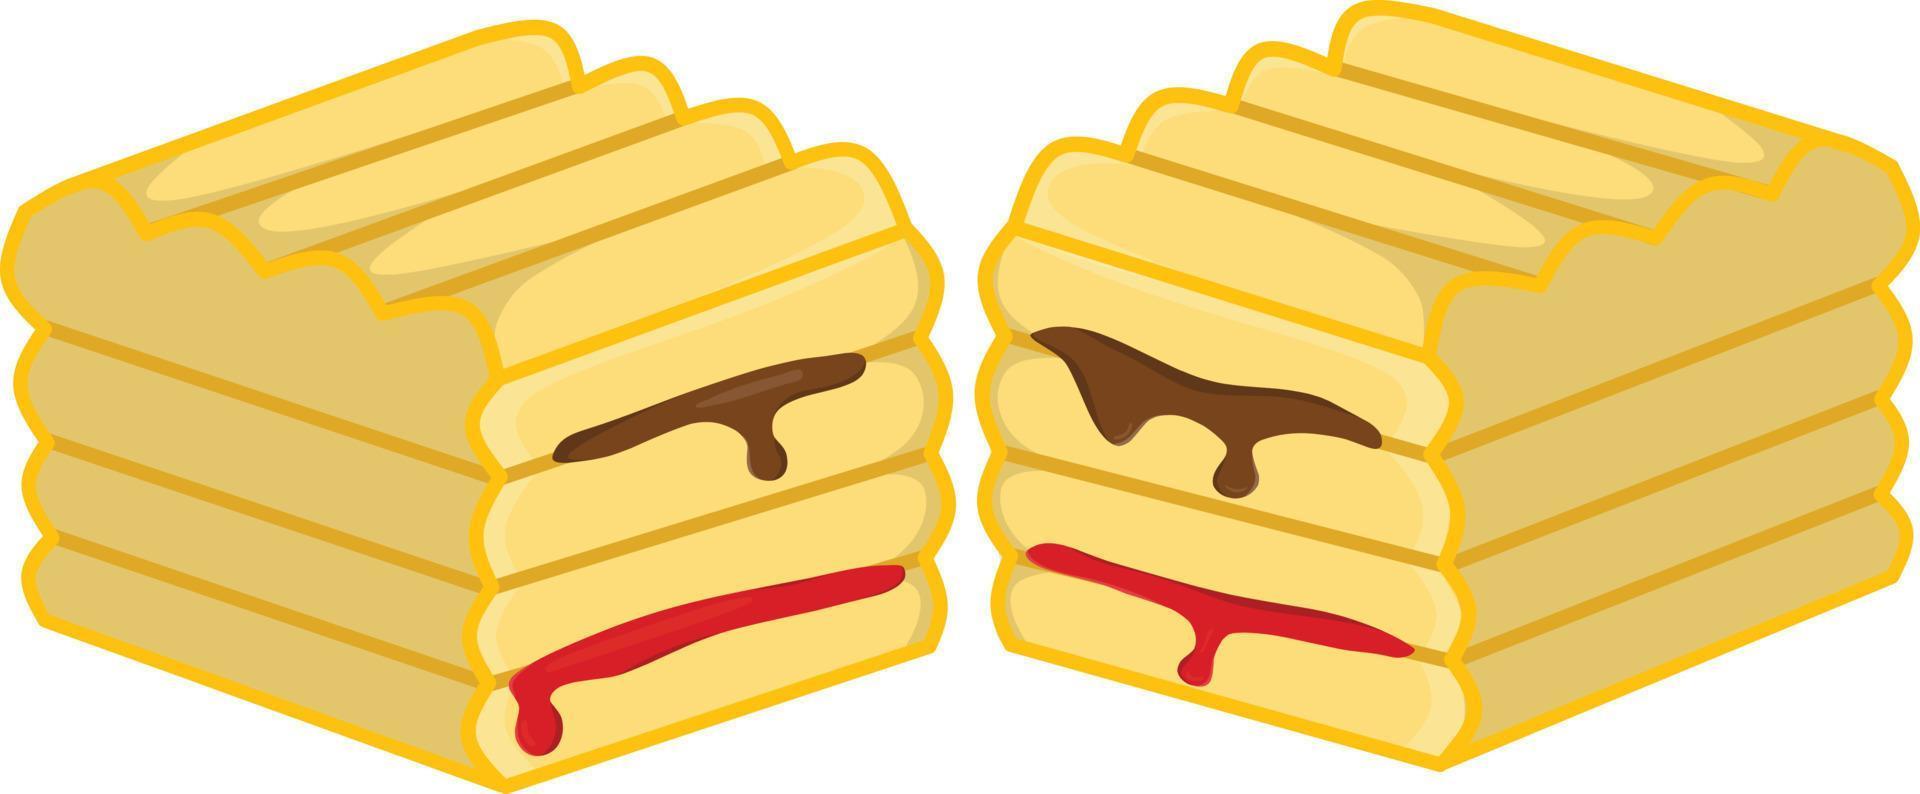 Bread toast with chocolate and strawberry jam in it, can be used for logos, icons, and illustrations of food and restaurants as well as businesses. vector